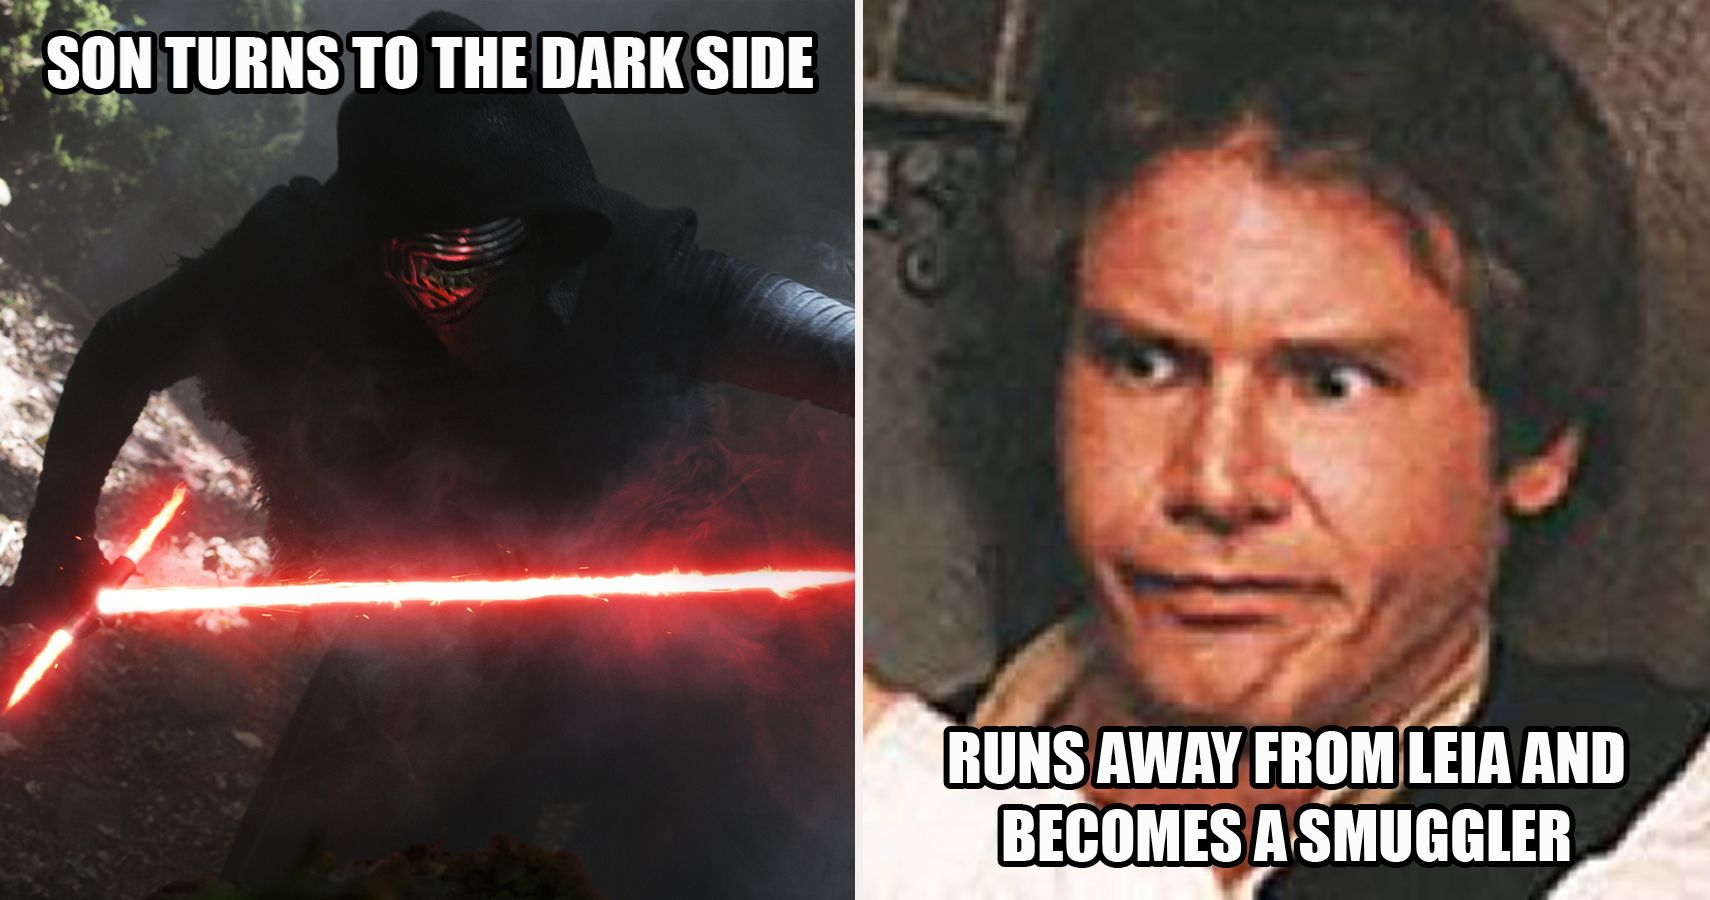 When Seemingly Everyone Survives Being Stabbed by a Lightsaber Now - Imgflip